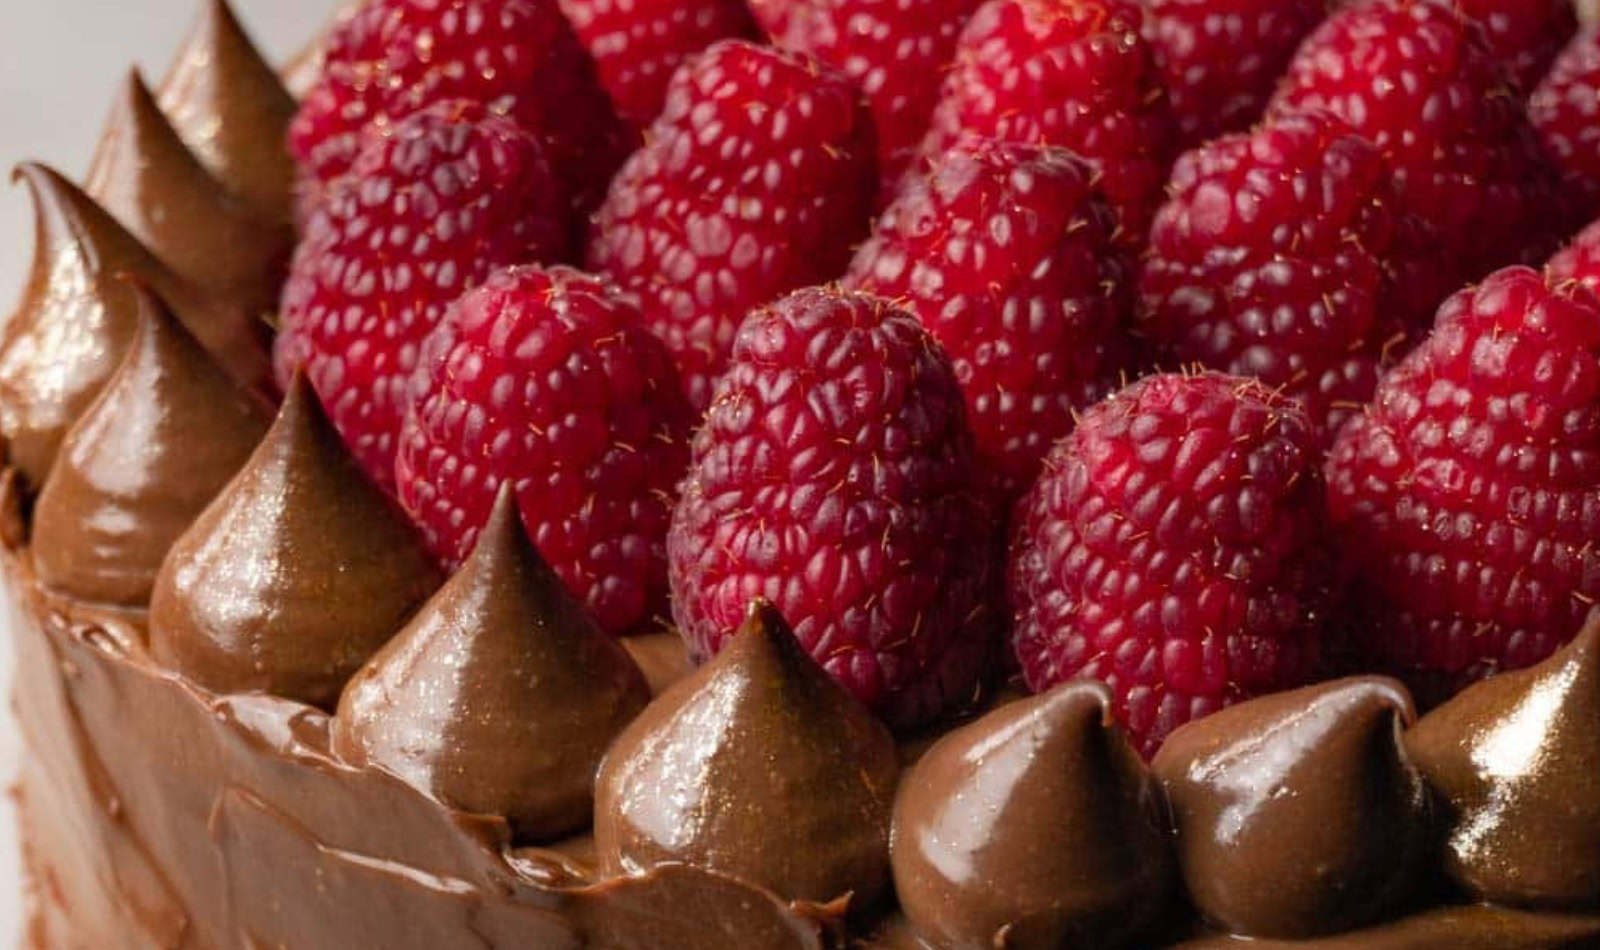 Image of chocolate frosted cake with strawberries on top